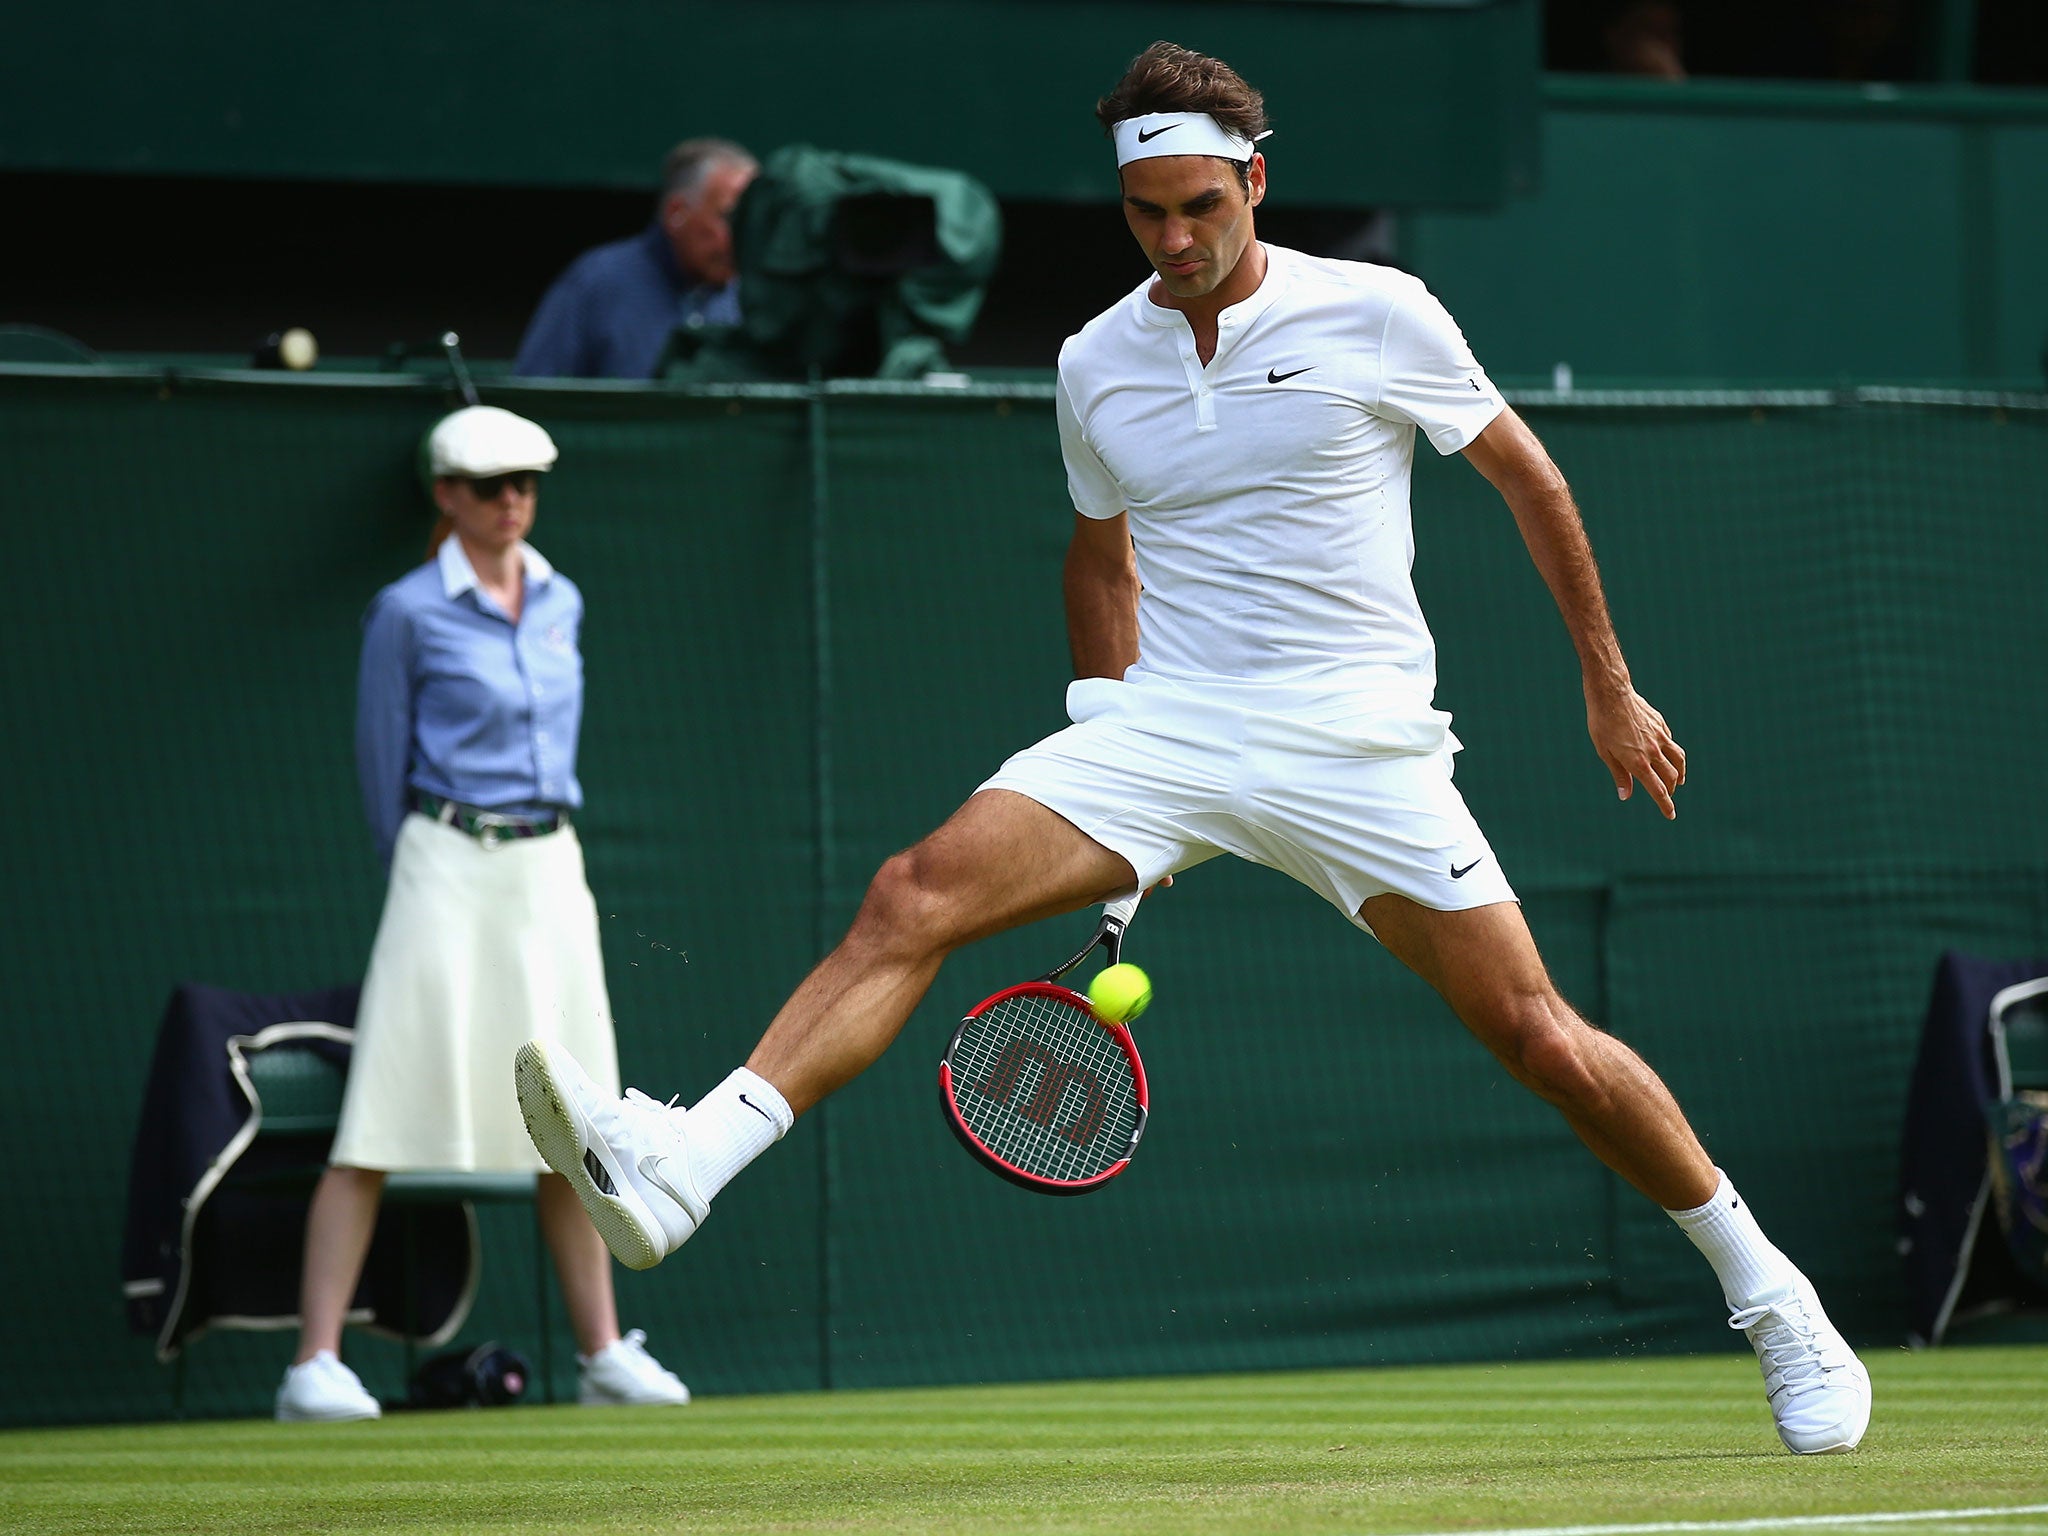 Roger Federer in second round action in which he beat Sam Querrey